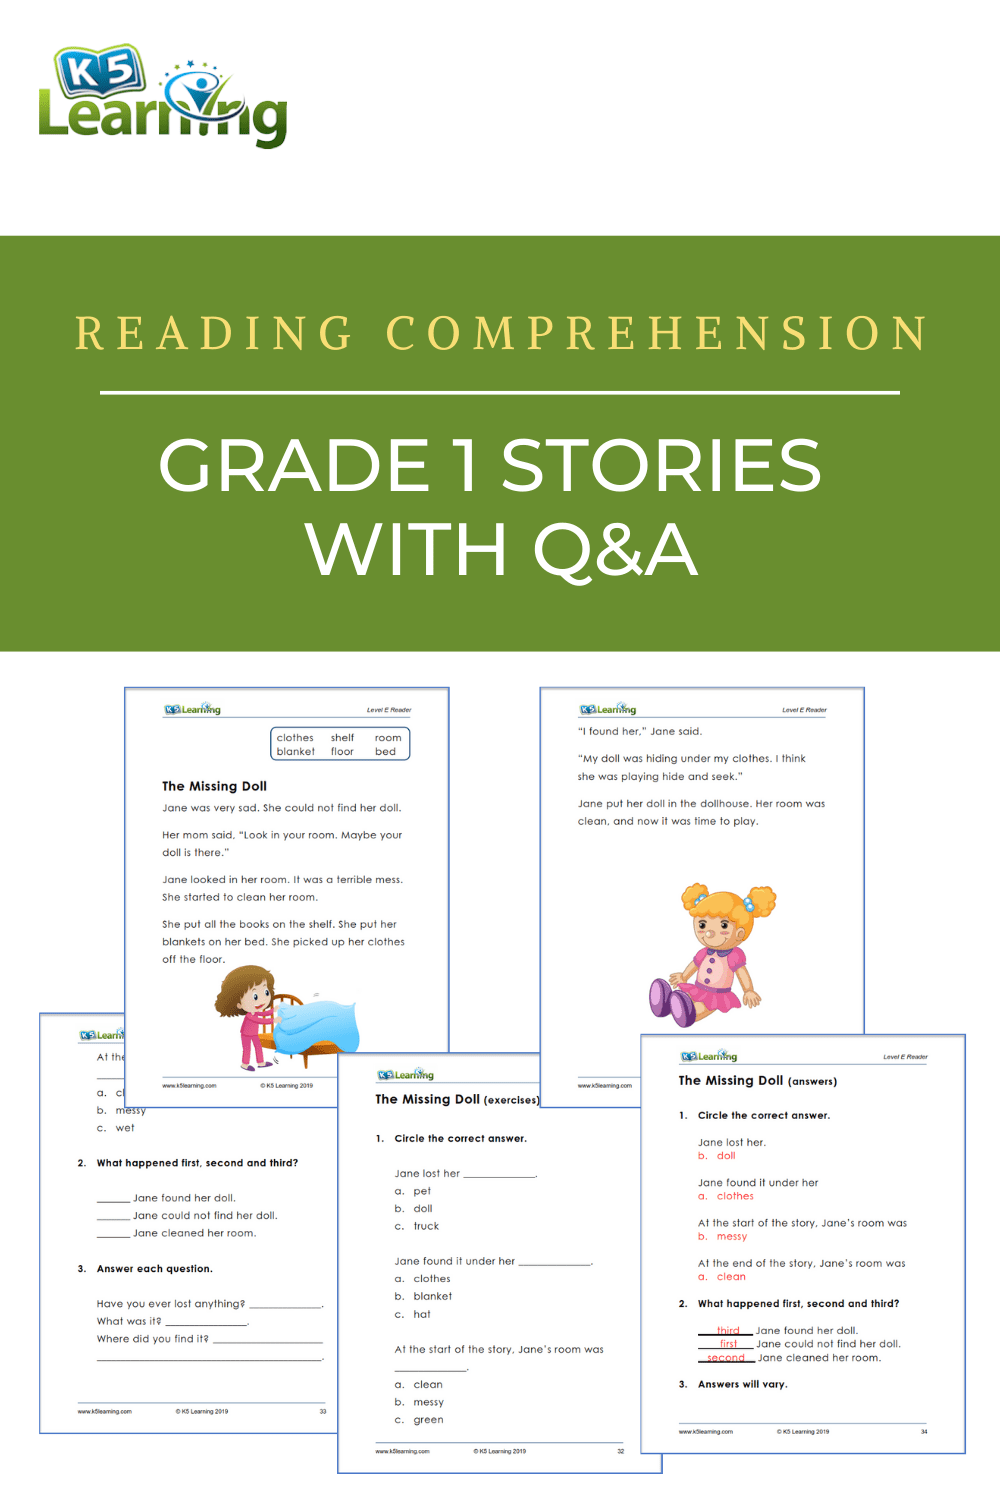 K5 Learning publishes new reading comprehension workbooks for grade 1